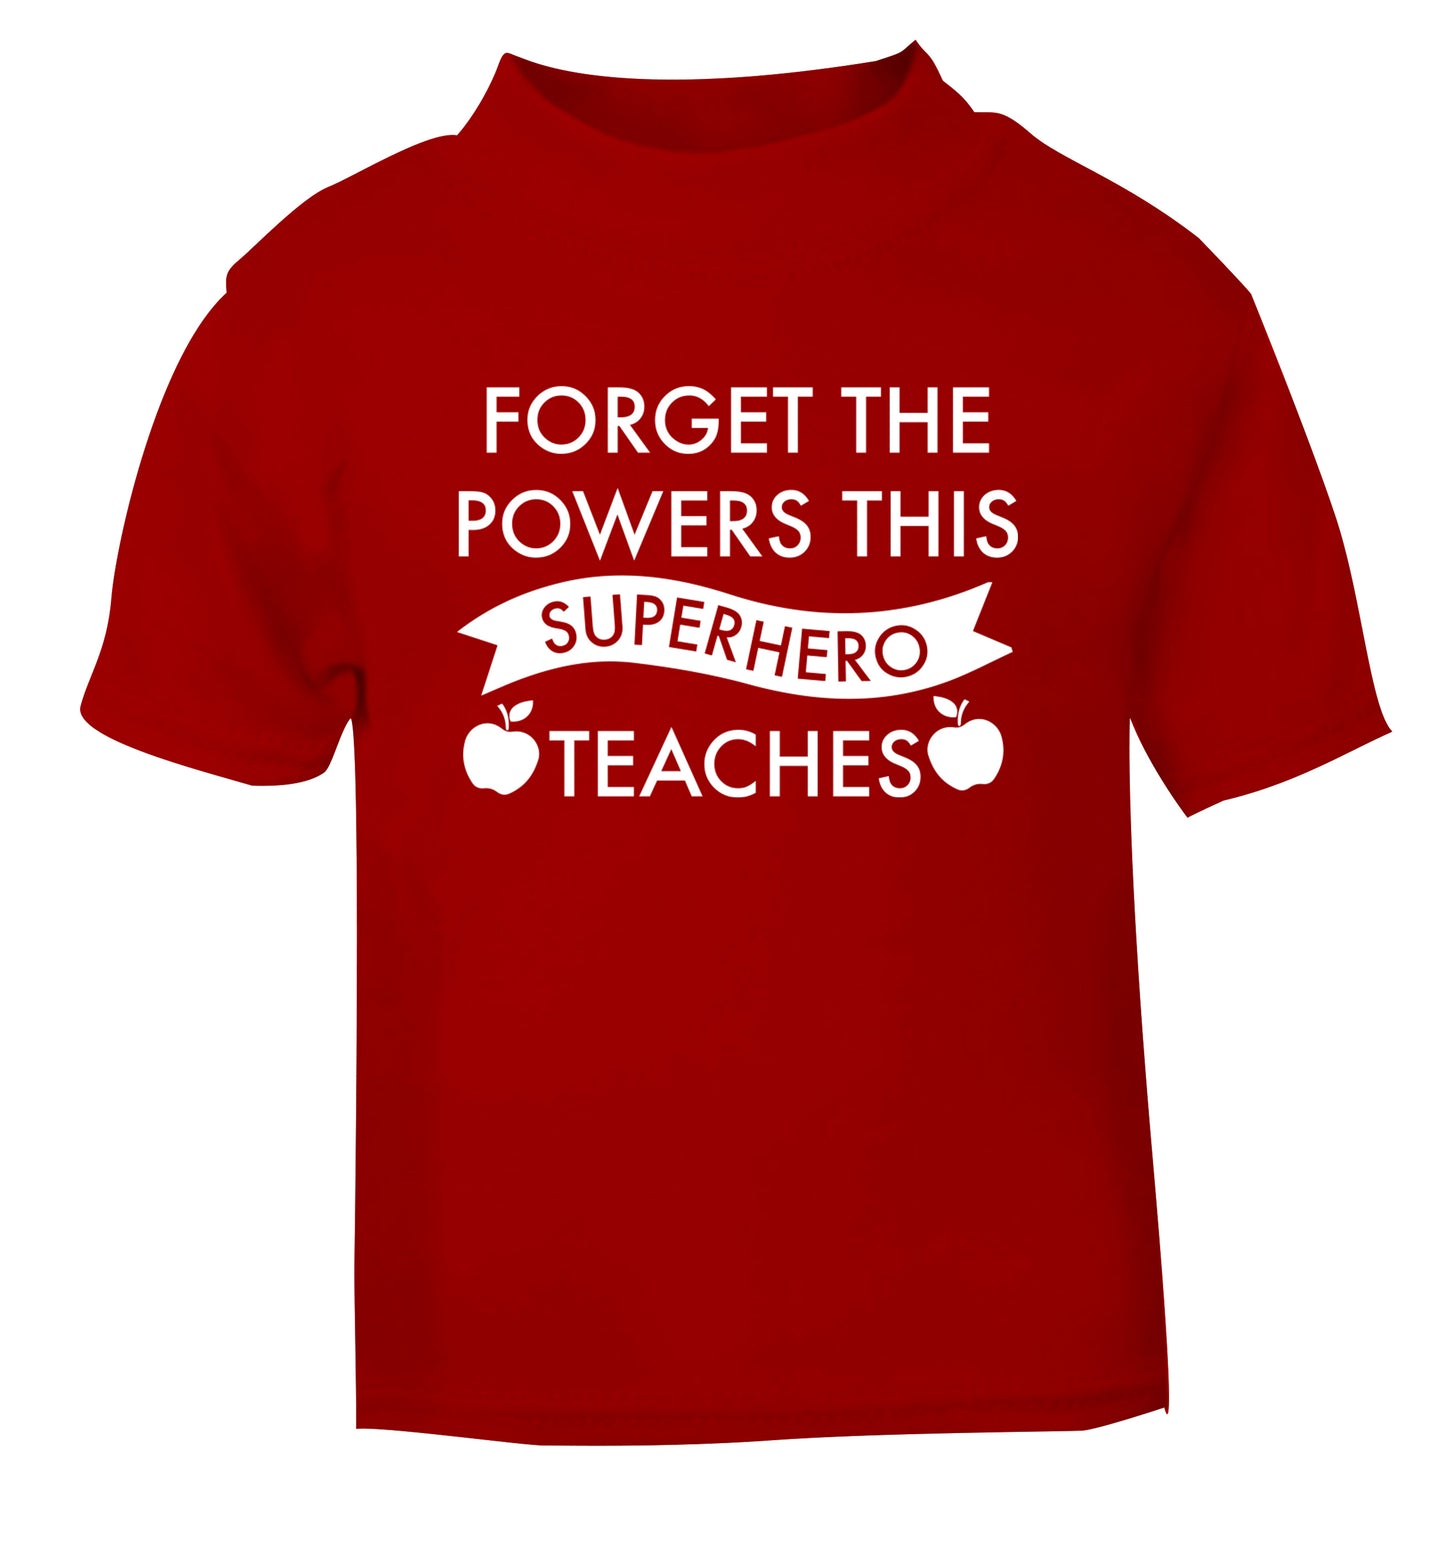 Forget the powers this superhero teaches red Baby Toddler Tshirt 2 Years